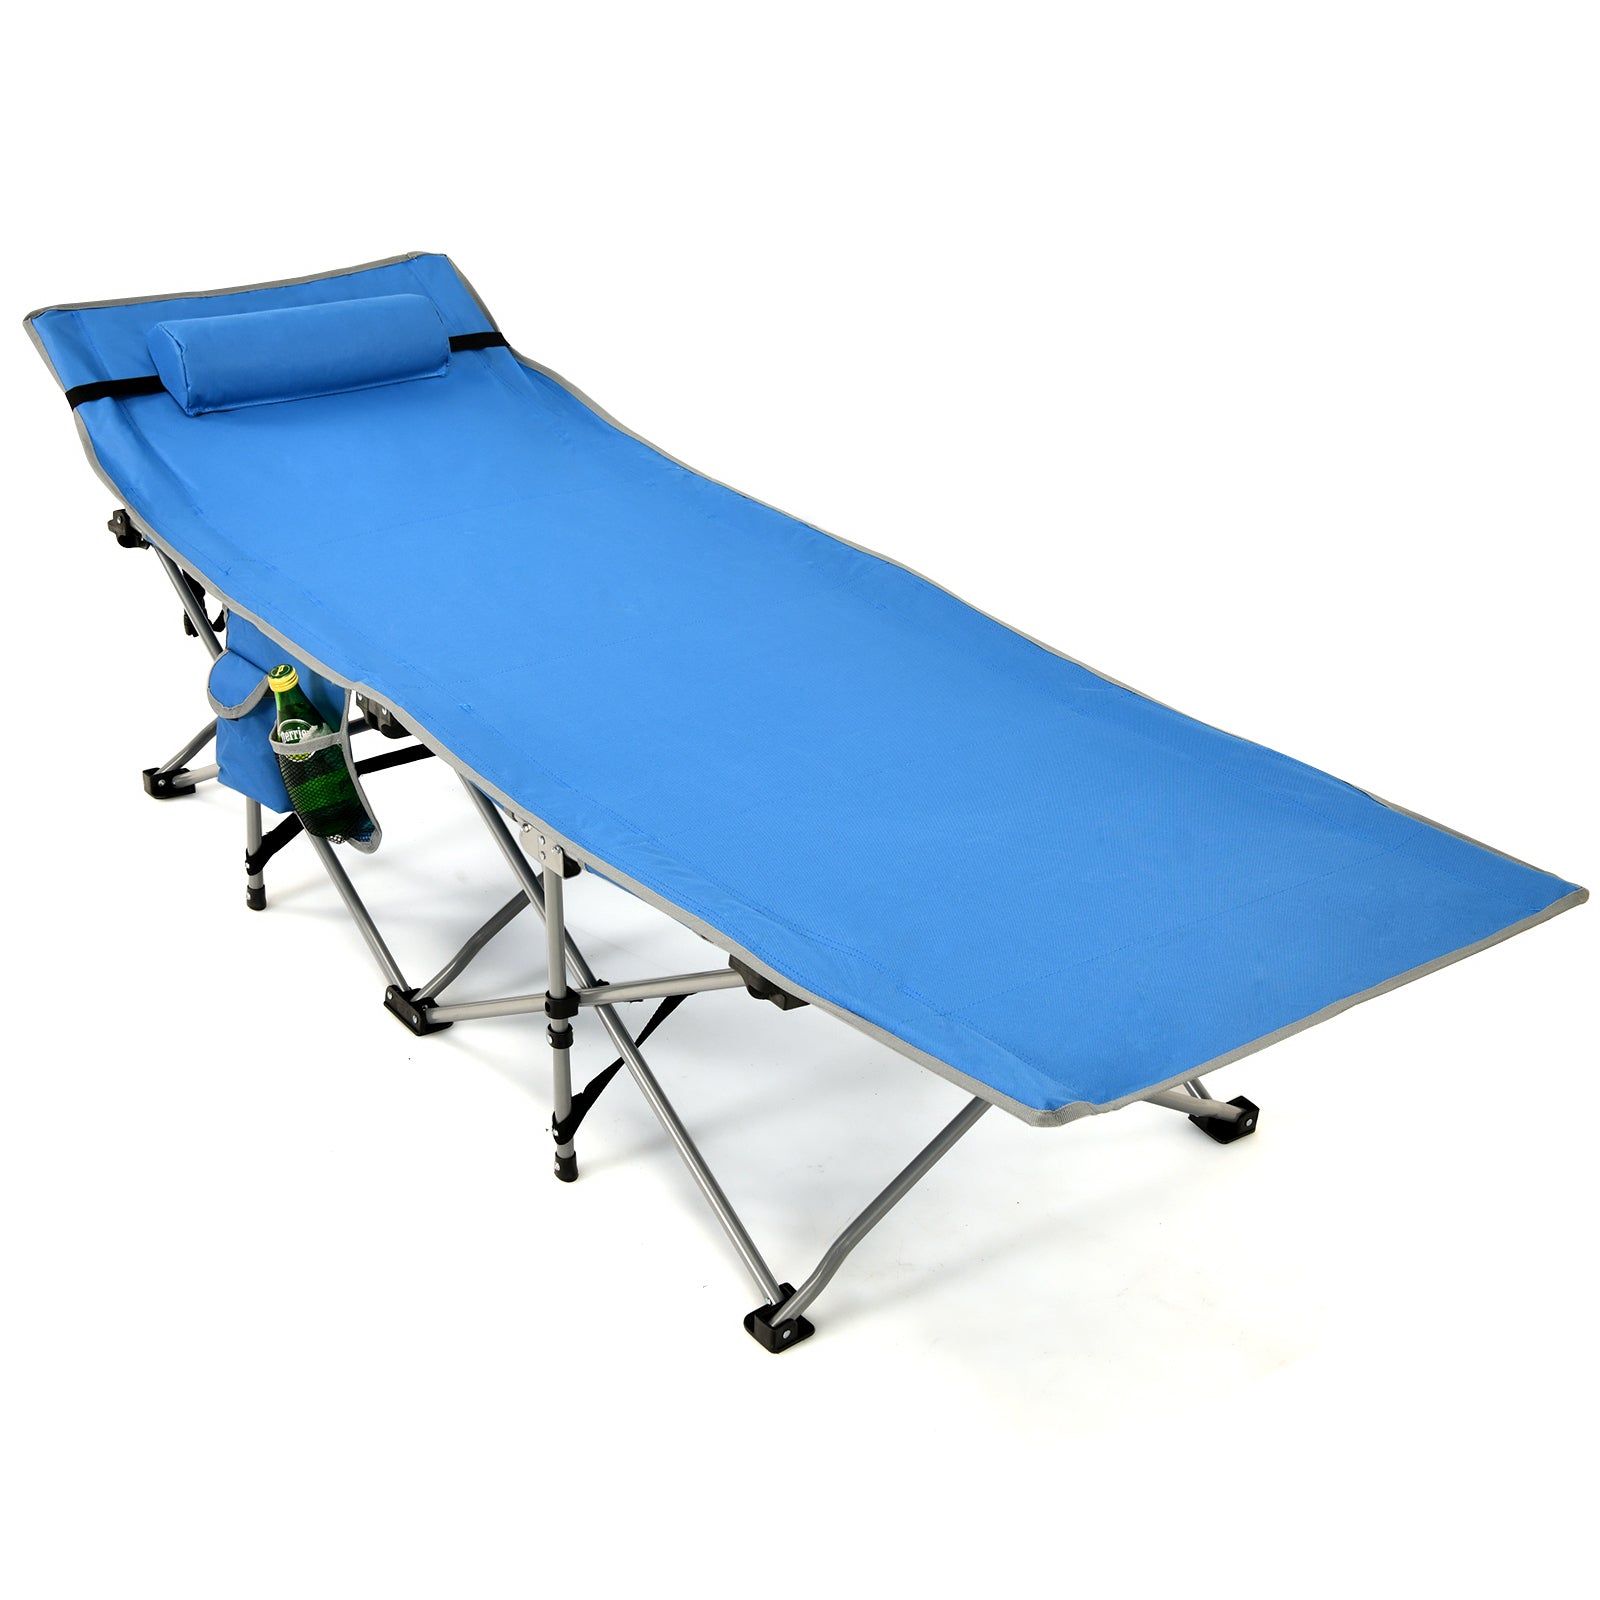 Folding Camping Cot with Detachable Headrest and Side Pocket Blue